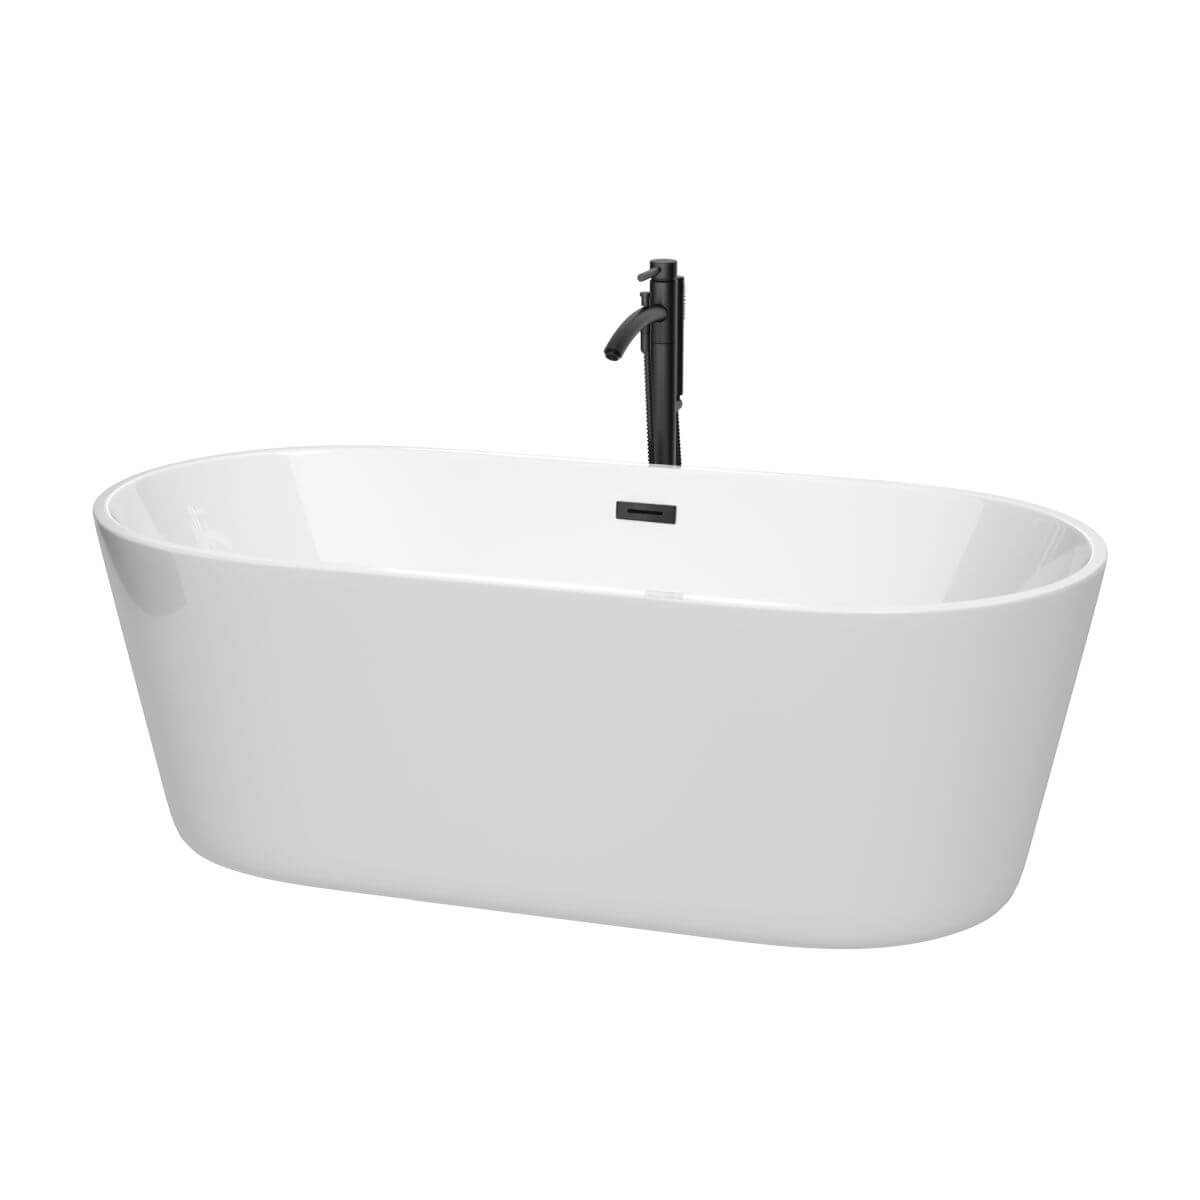 Wyndham Collection Carissa 67 inch Freestanding Bathtub in White with Floor Mounted Faucet, Drain and Overflow Trim in Matte Black - WCOBT101267MBATPBK